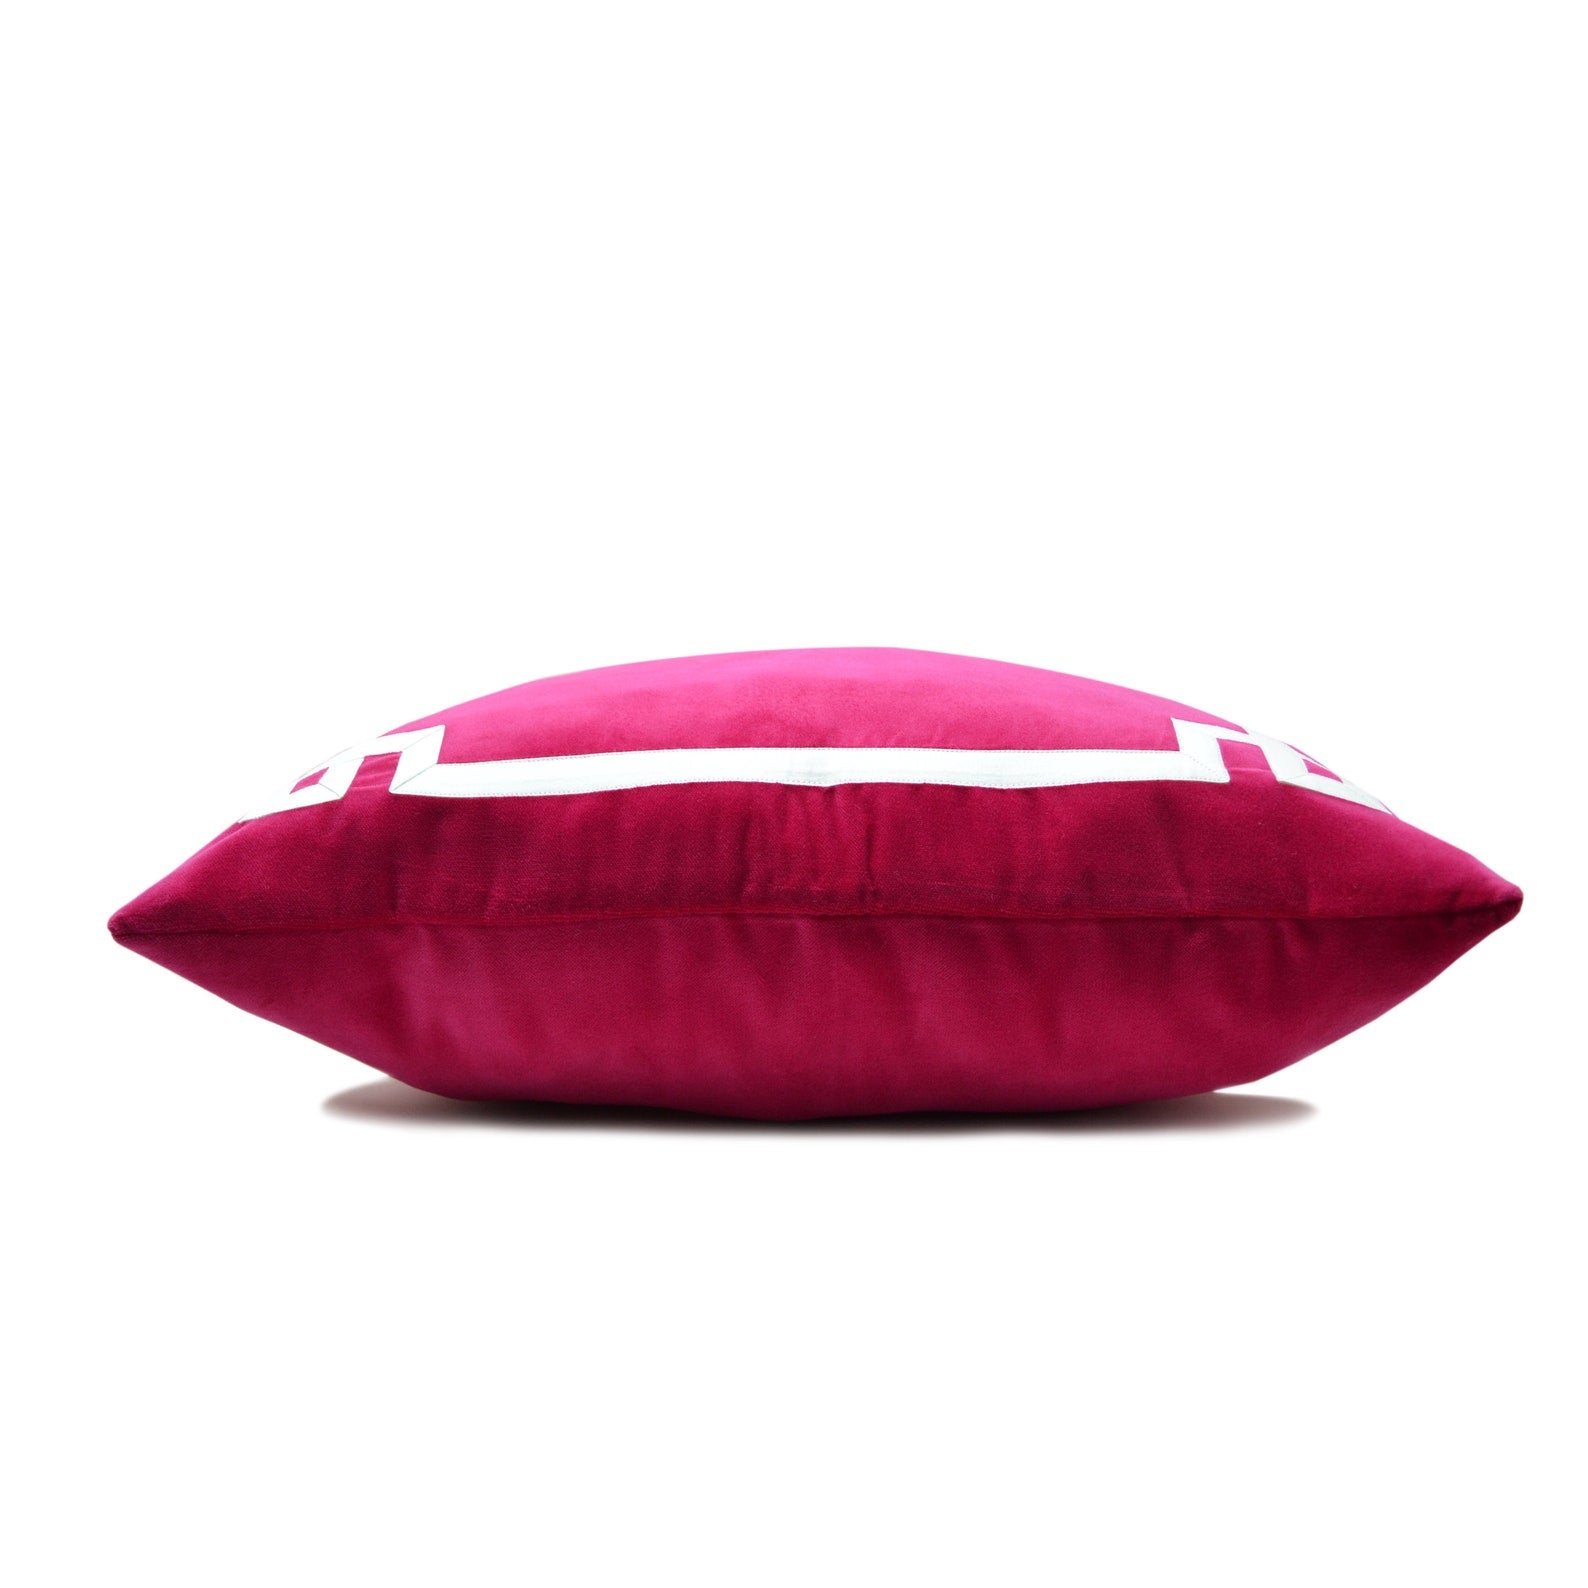 Hot Pink Greek Key Throw Pillow Cover